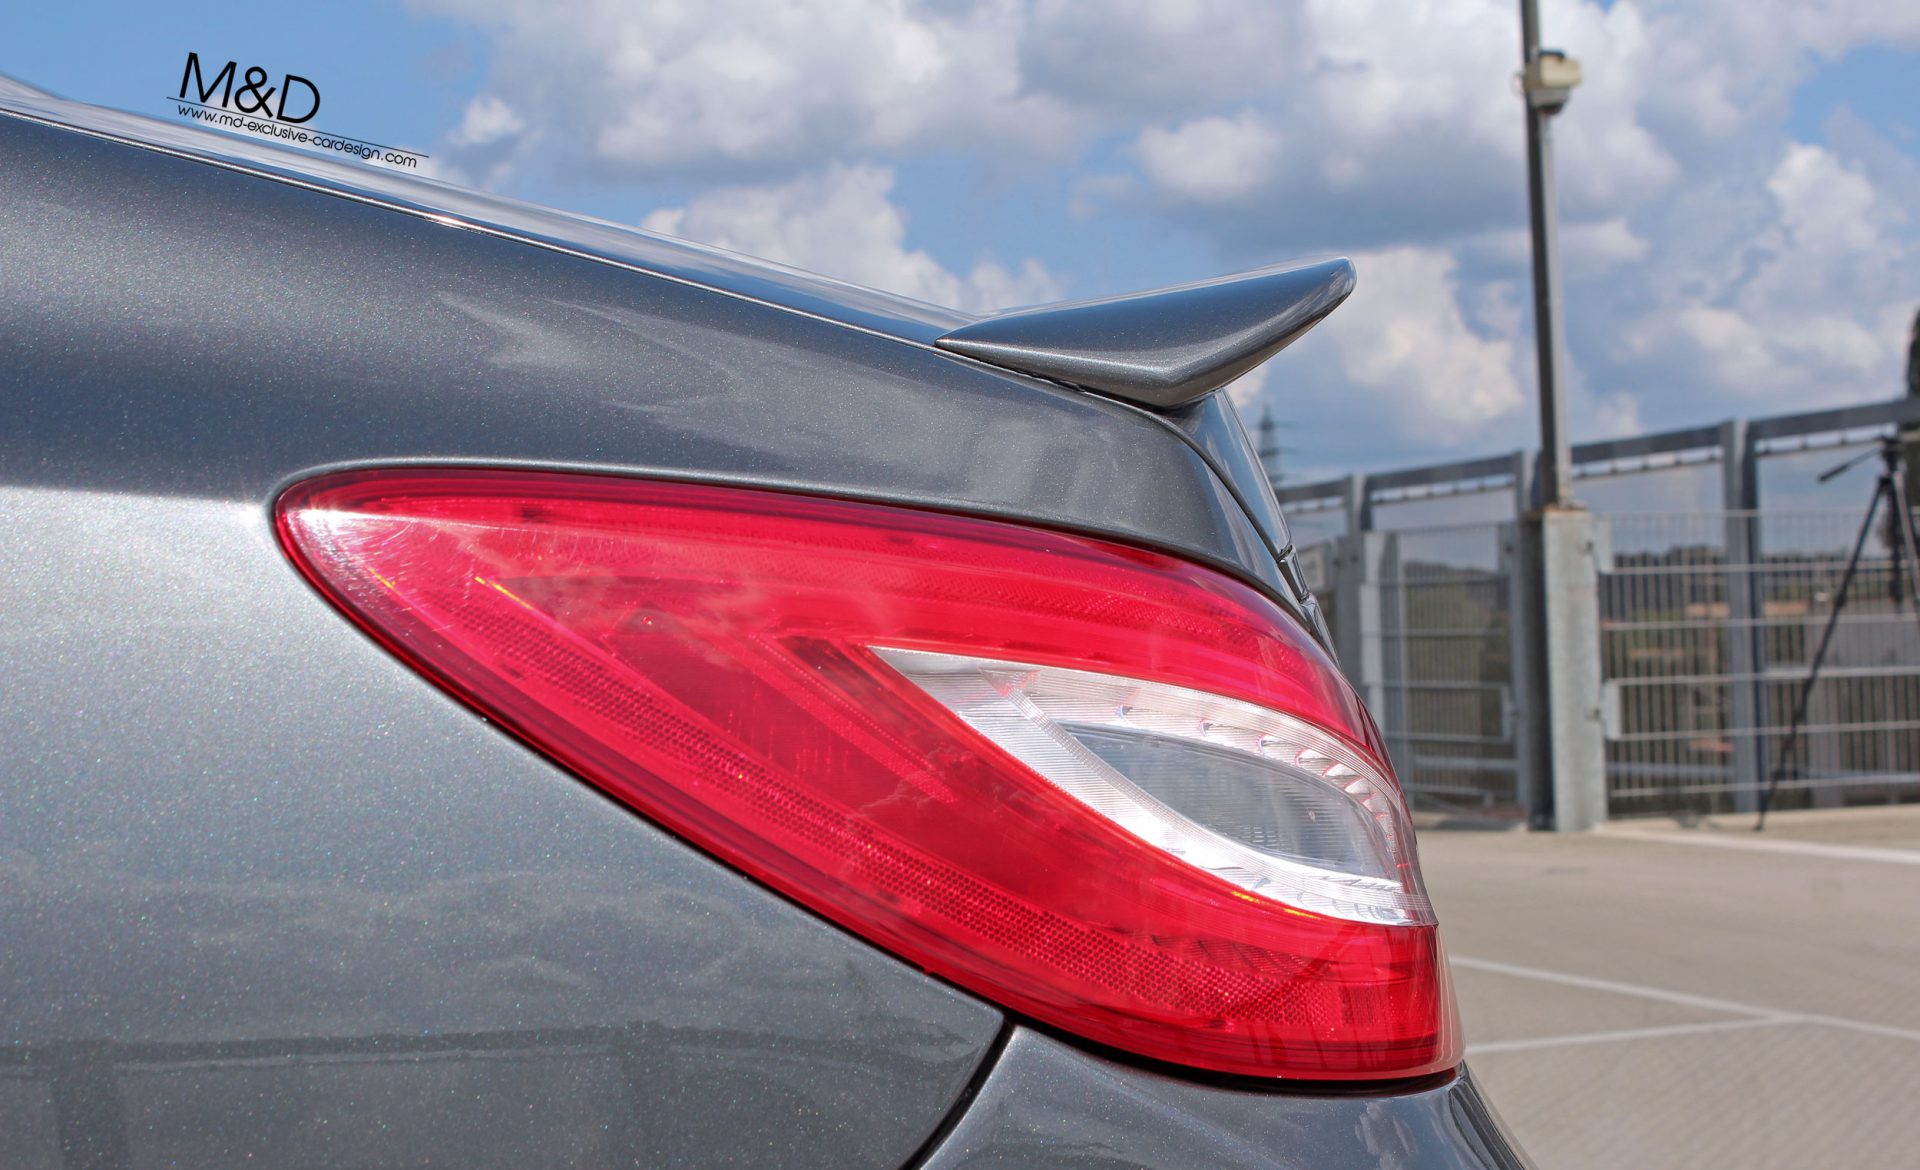 PD550 Black Edition Rear Trunk Spoiler for Mercedes CLS C218